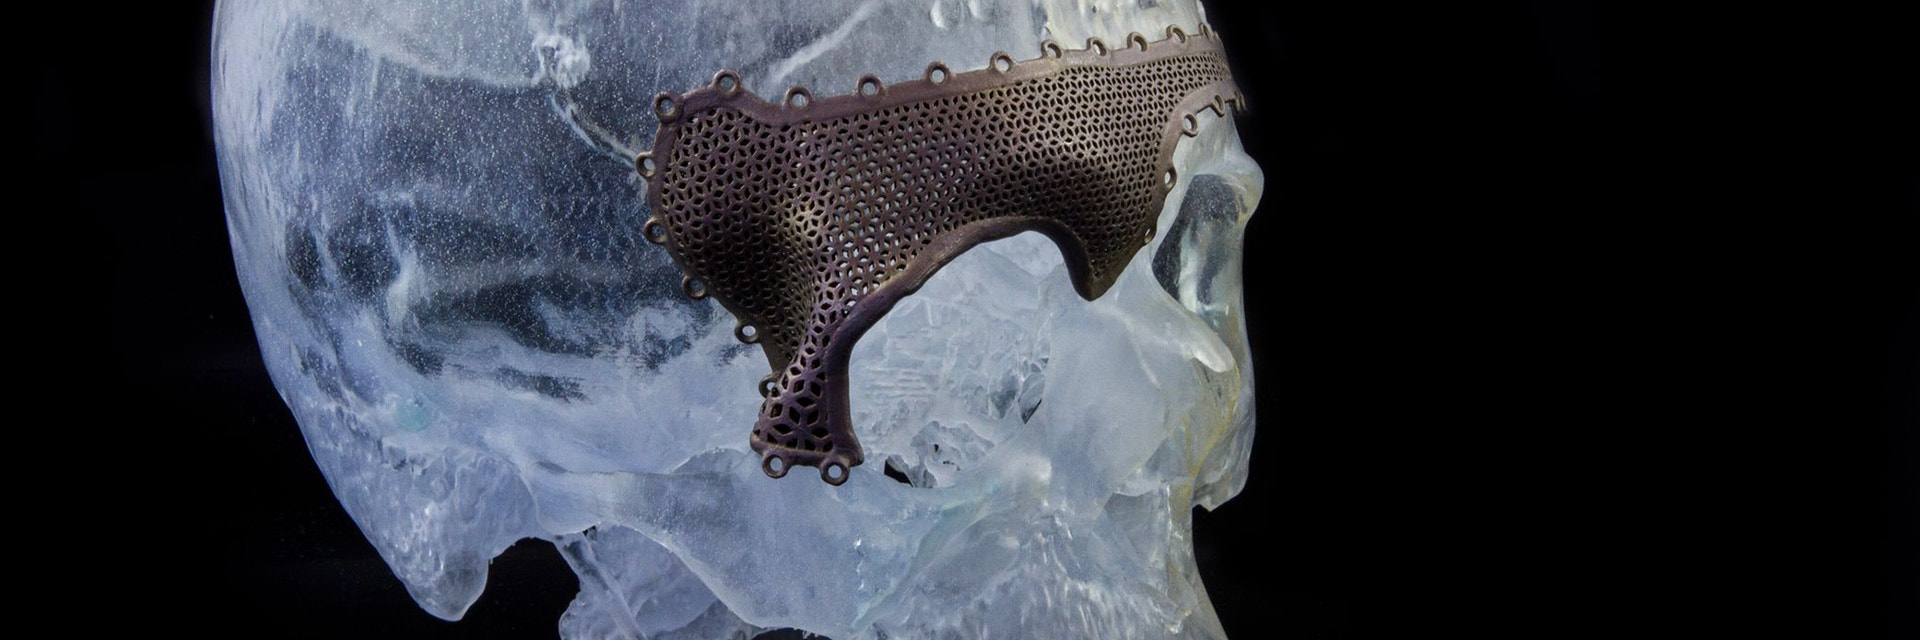 A 3D-printed human skull with cranial plate 